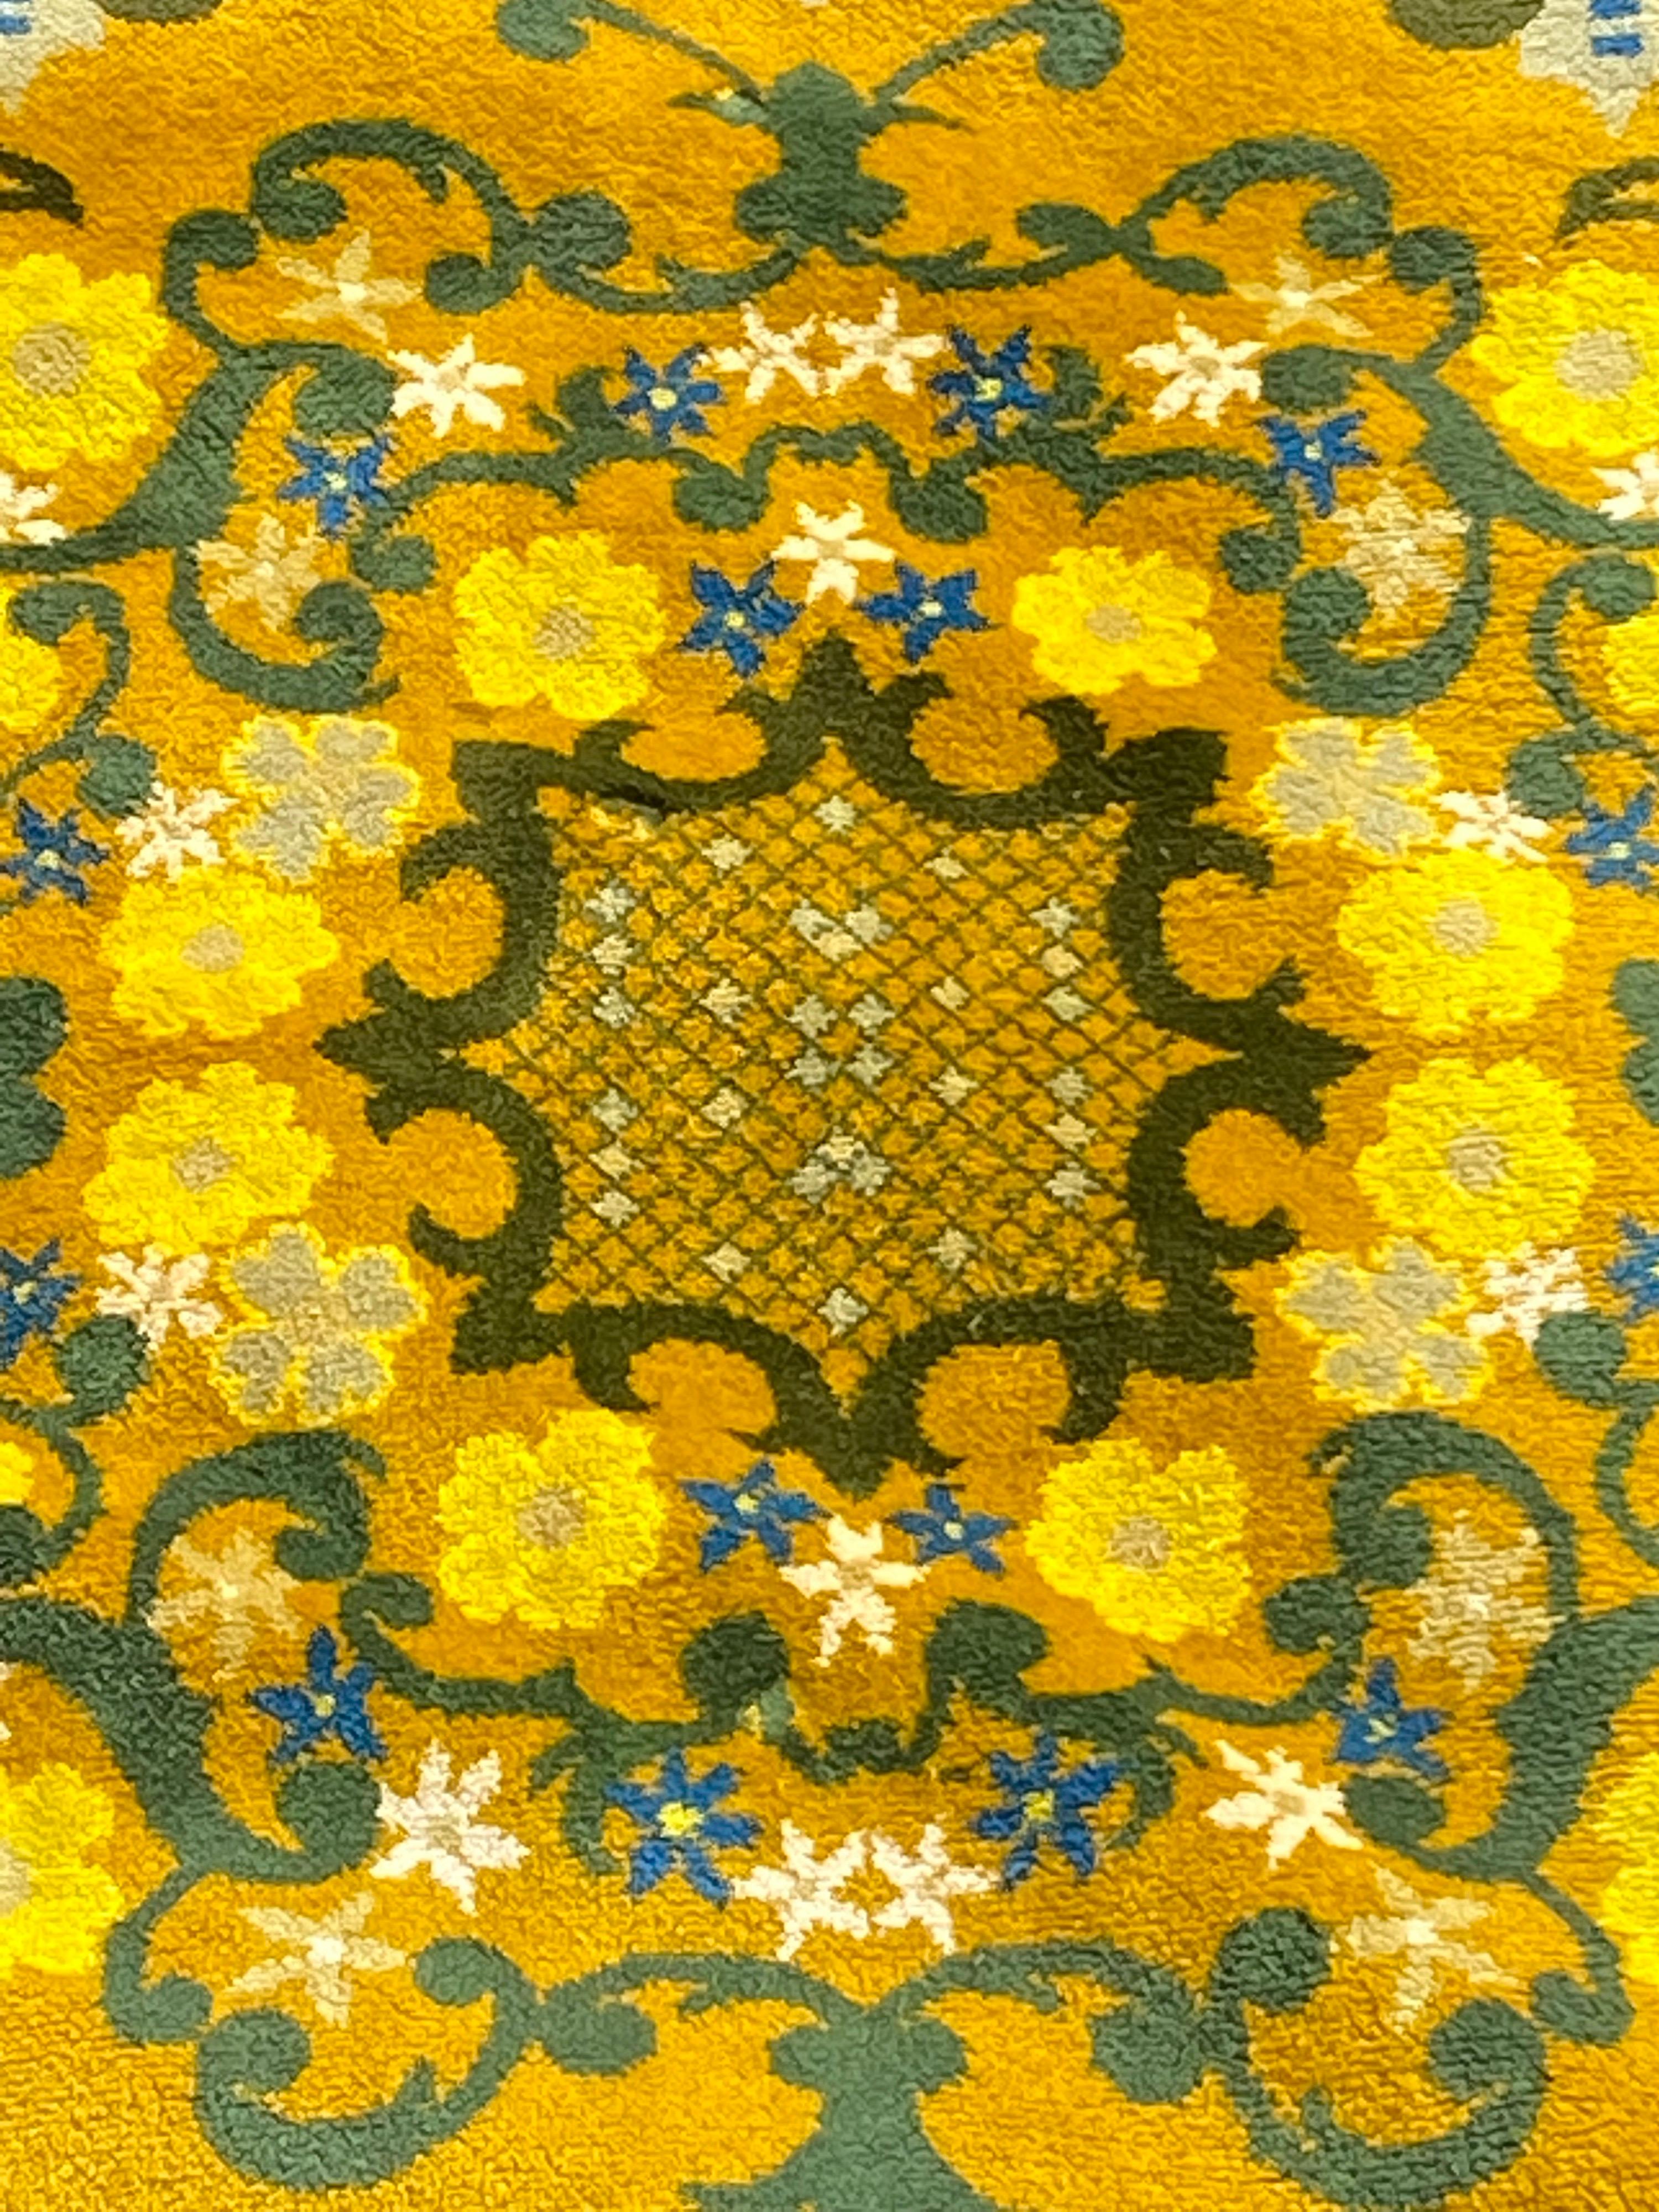 Large 12' square Portuguese wool rug. Great colors and in very nice condition! Just Cleaned and ready to go! Bright Yellows and Greens! Add a little zip to that room!